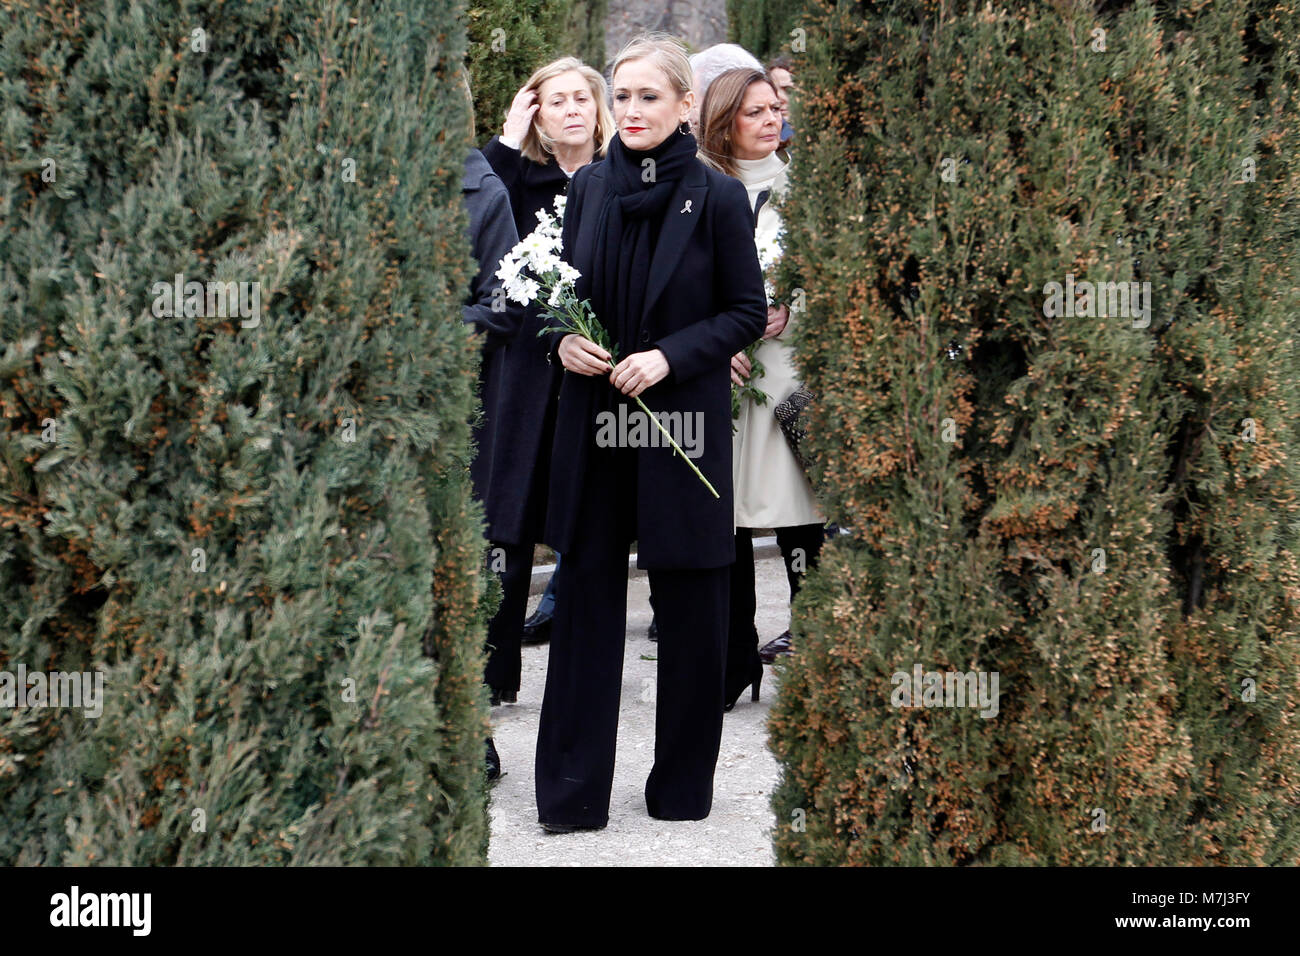 Madrid, Spain. 11th March, 2018.Cristina Cifuentes during a tribute in memory of the victims of the attack of 11-M 2004, at the forest of the Retiro Park on Sunday 11 March 2018. Credit: Gtres Información más Comuniación on line, S.L./Alamy Live News Stock Photo